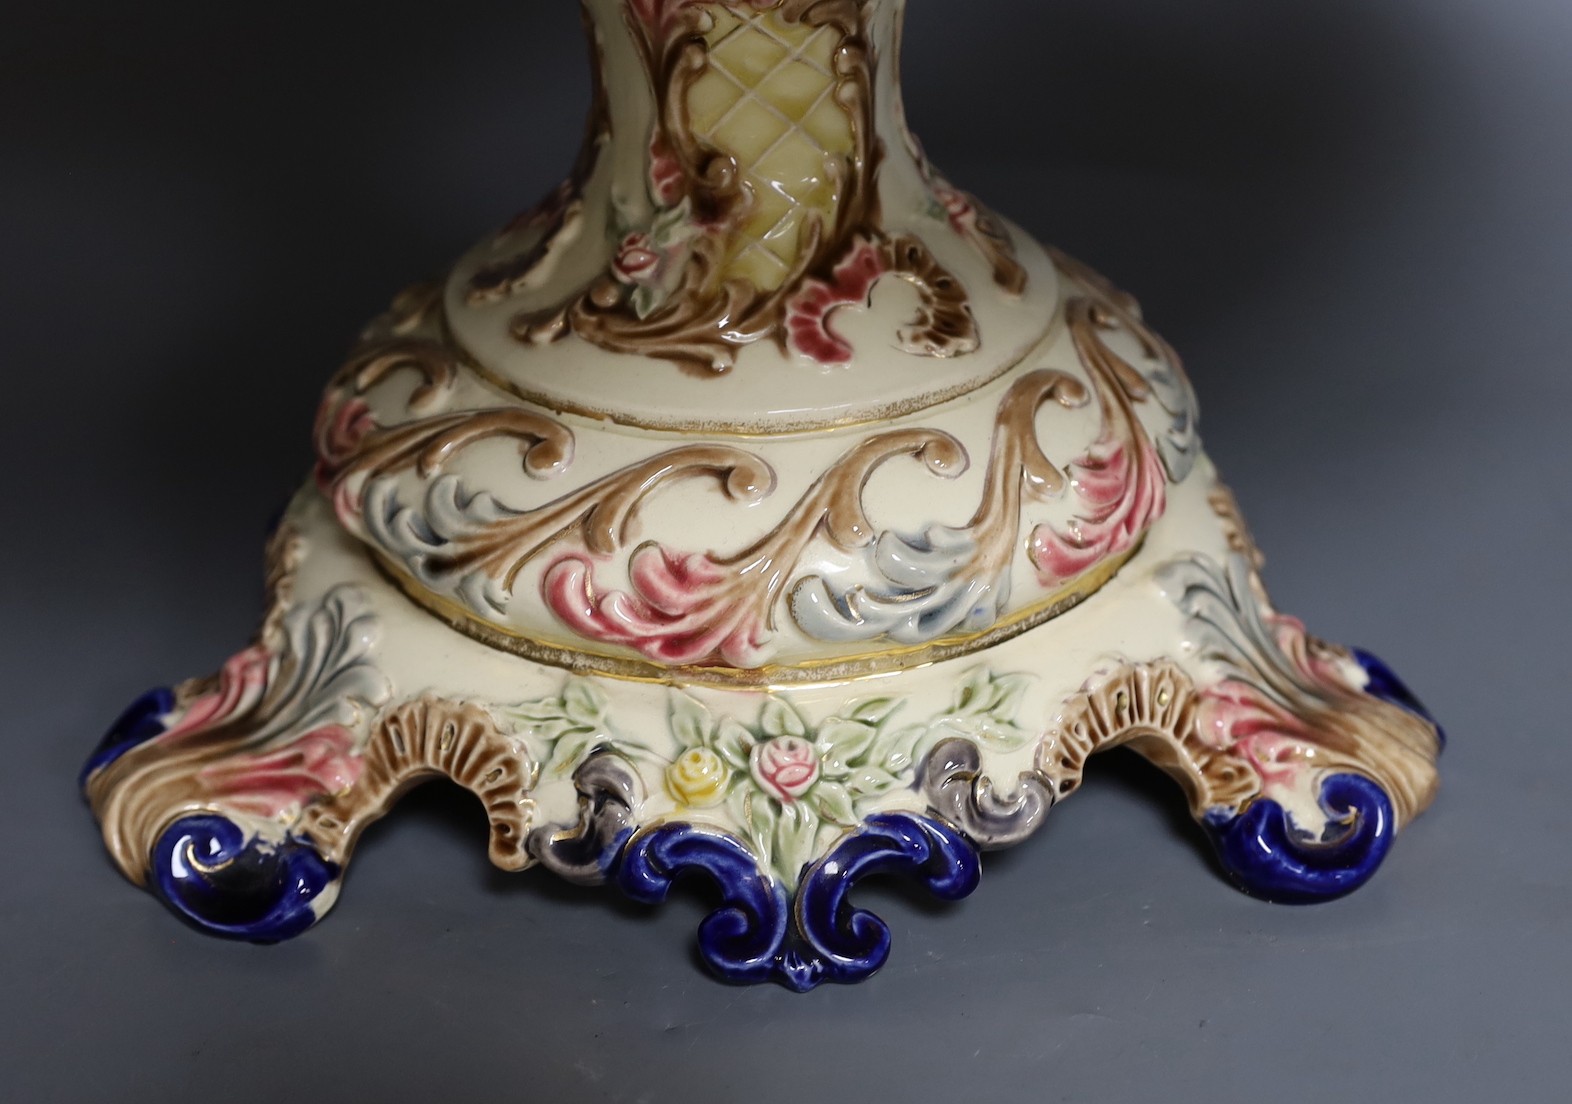 An Eichwald rococo style pottery centrepiece, 50cm - Image 4 of 5